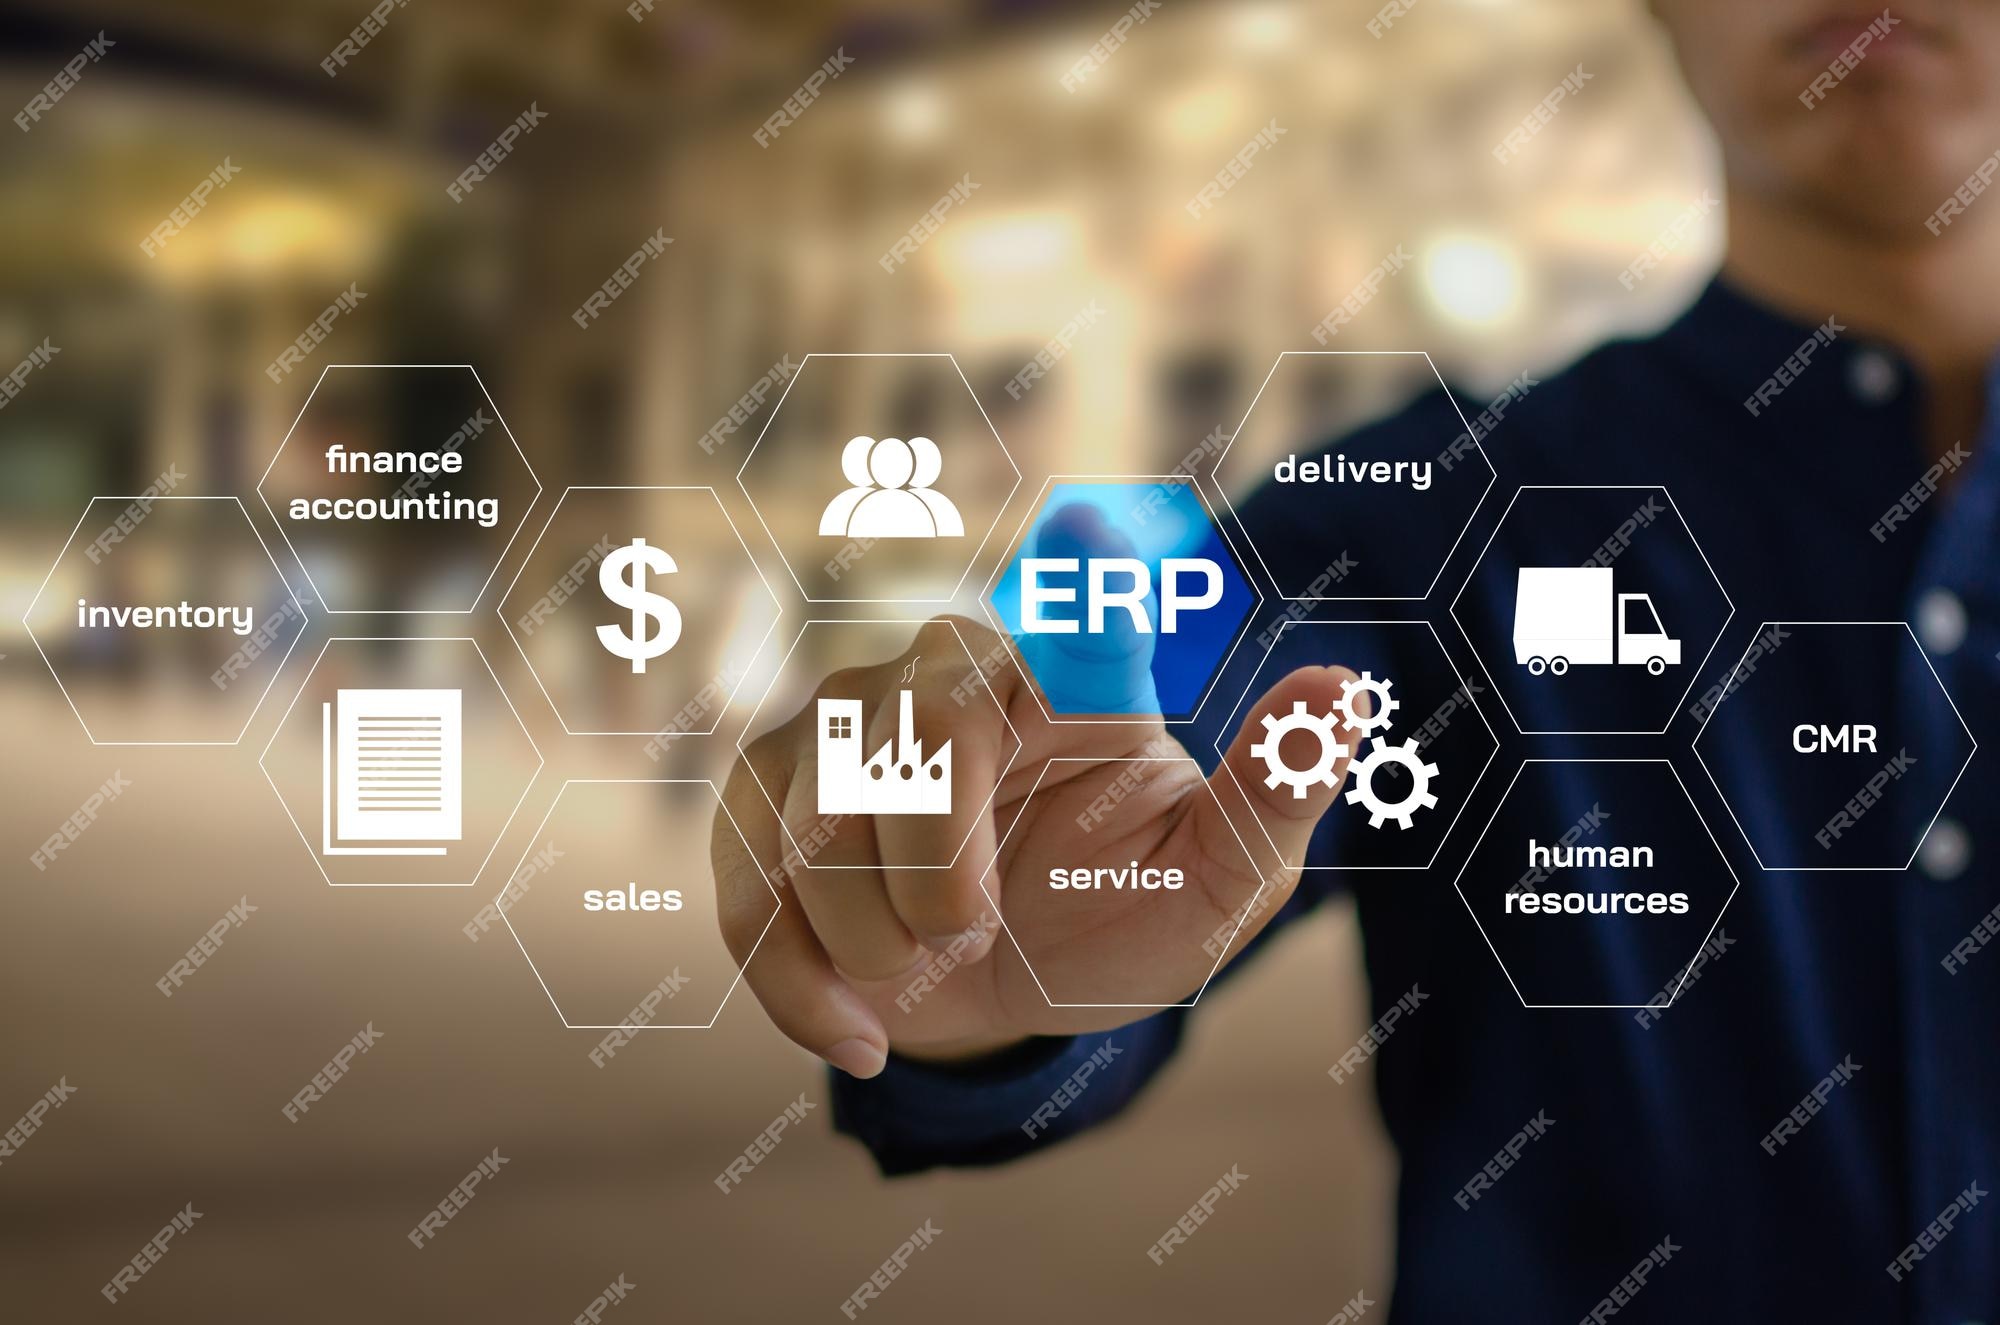 premium photo | erp enterprise resource planning. planning to manage the organization to be able to use resources efficiently and for maximum benefit. management concept icons on virtual screen.